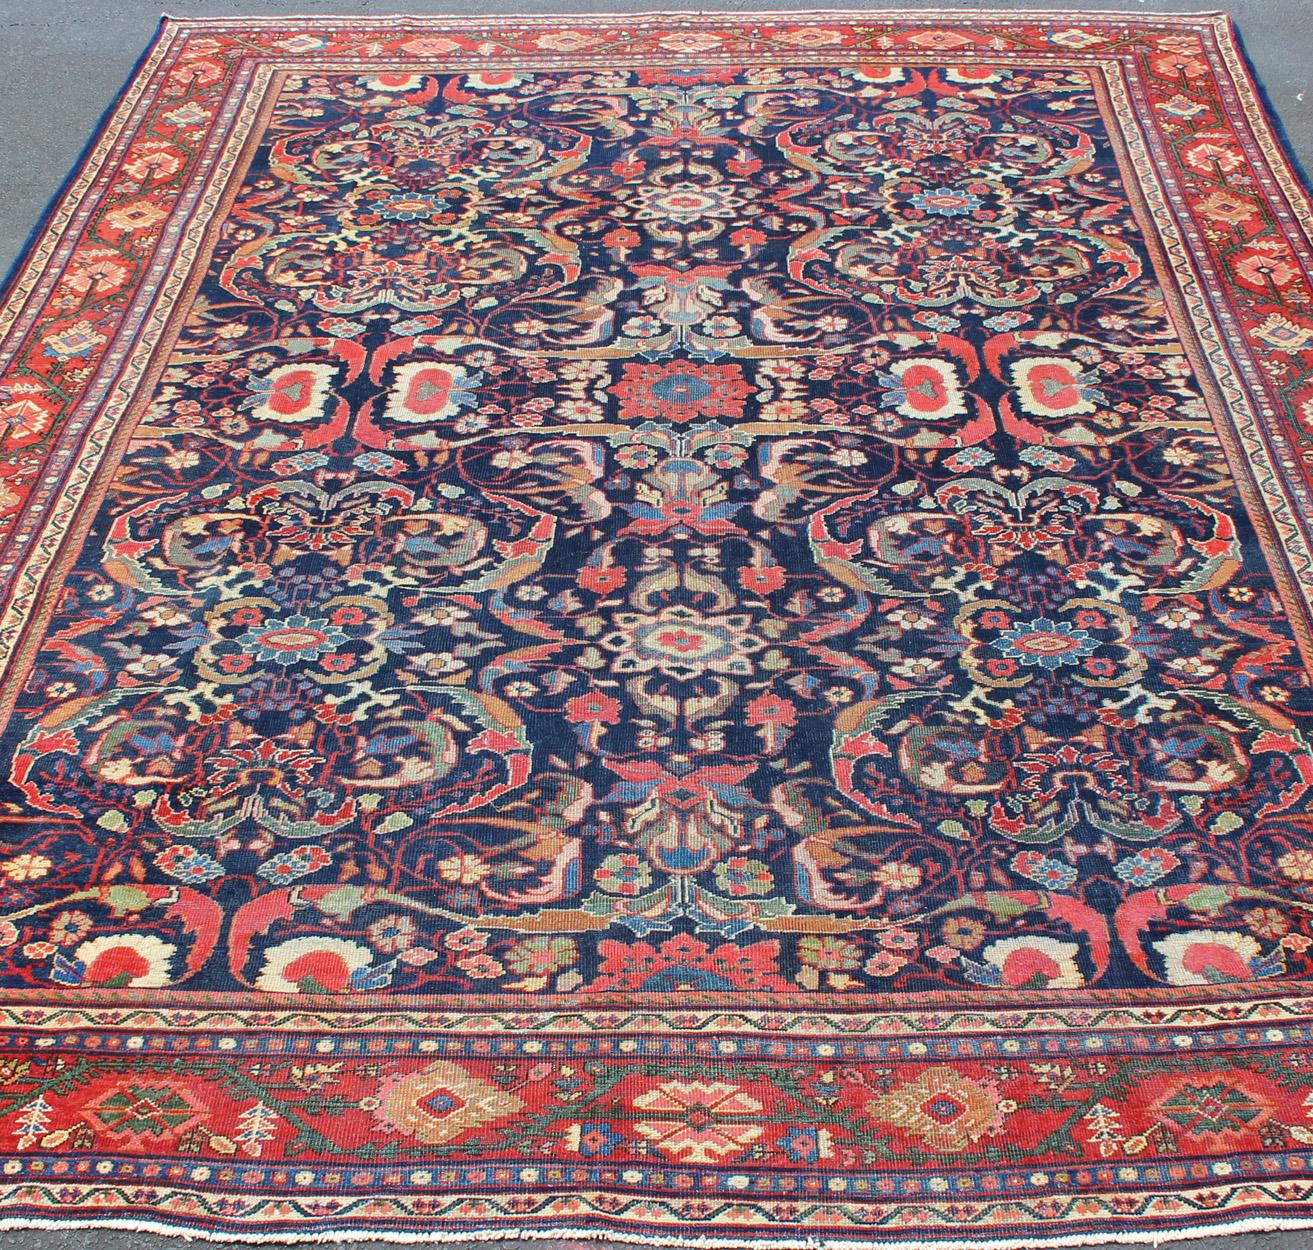 Early 20th Century Colorful Antique Persian Sultanabad Rug with Navy Blue Field and Red Border For Sale